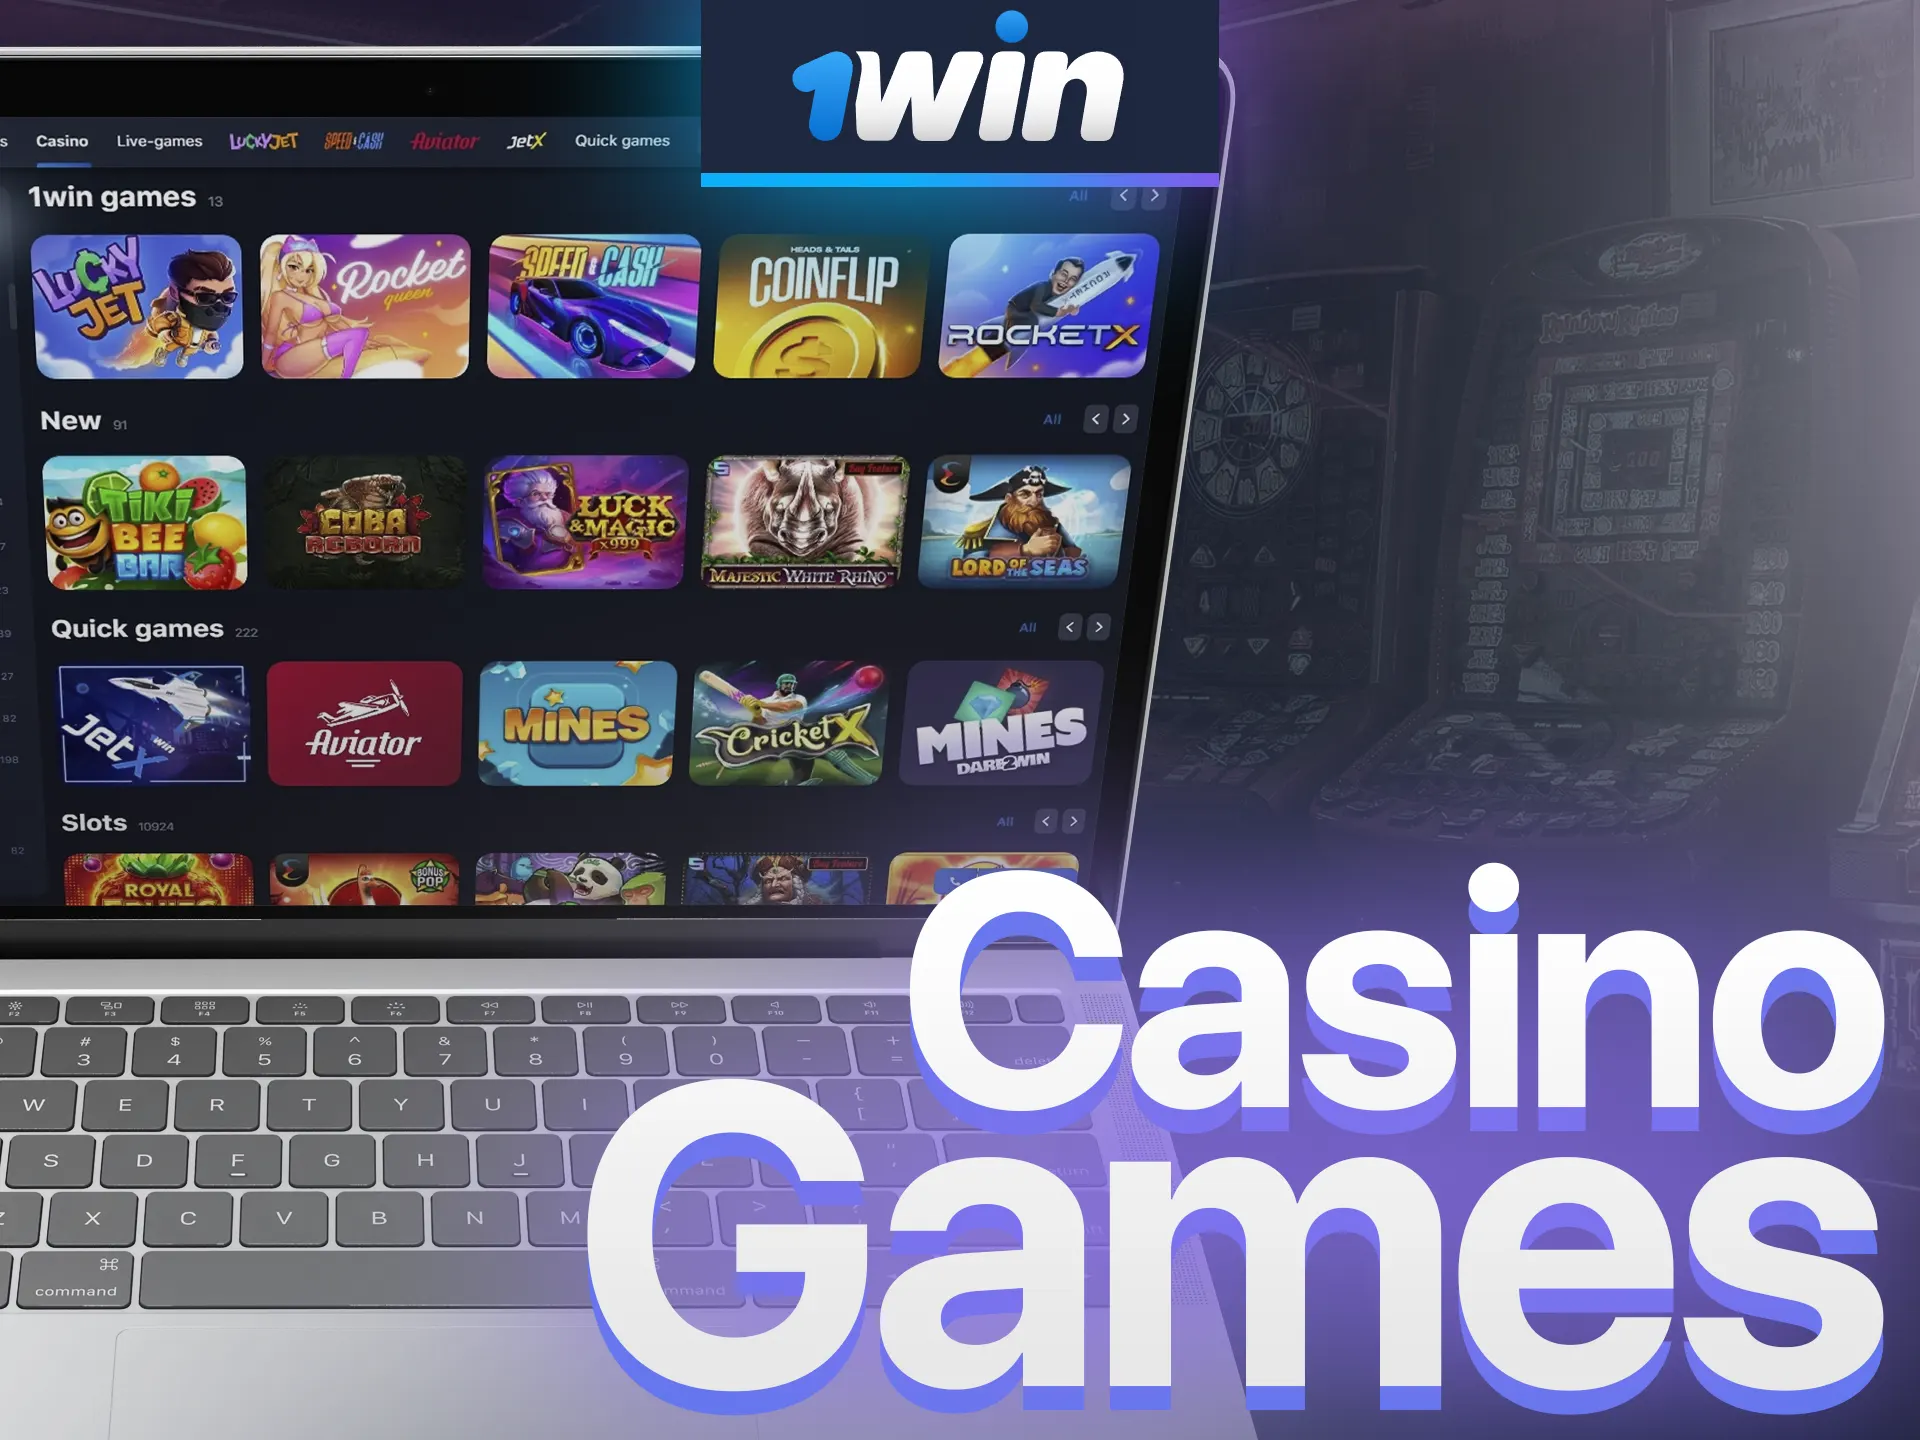 An extensive collection of classic slots, table games, and live dealer games awaits players of all levels at 1win Casino.